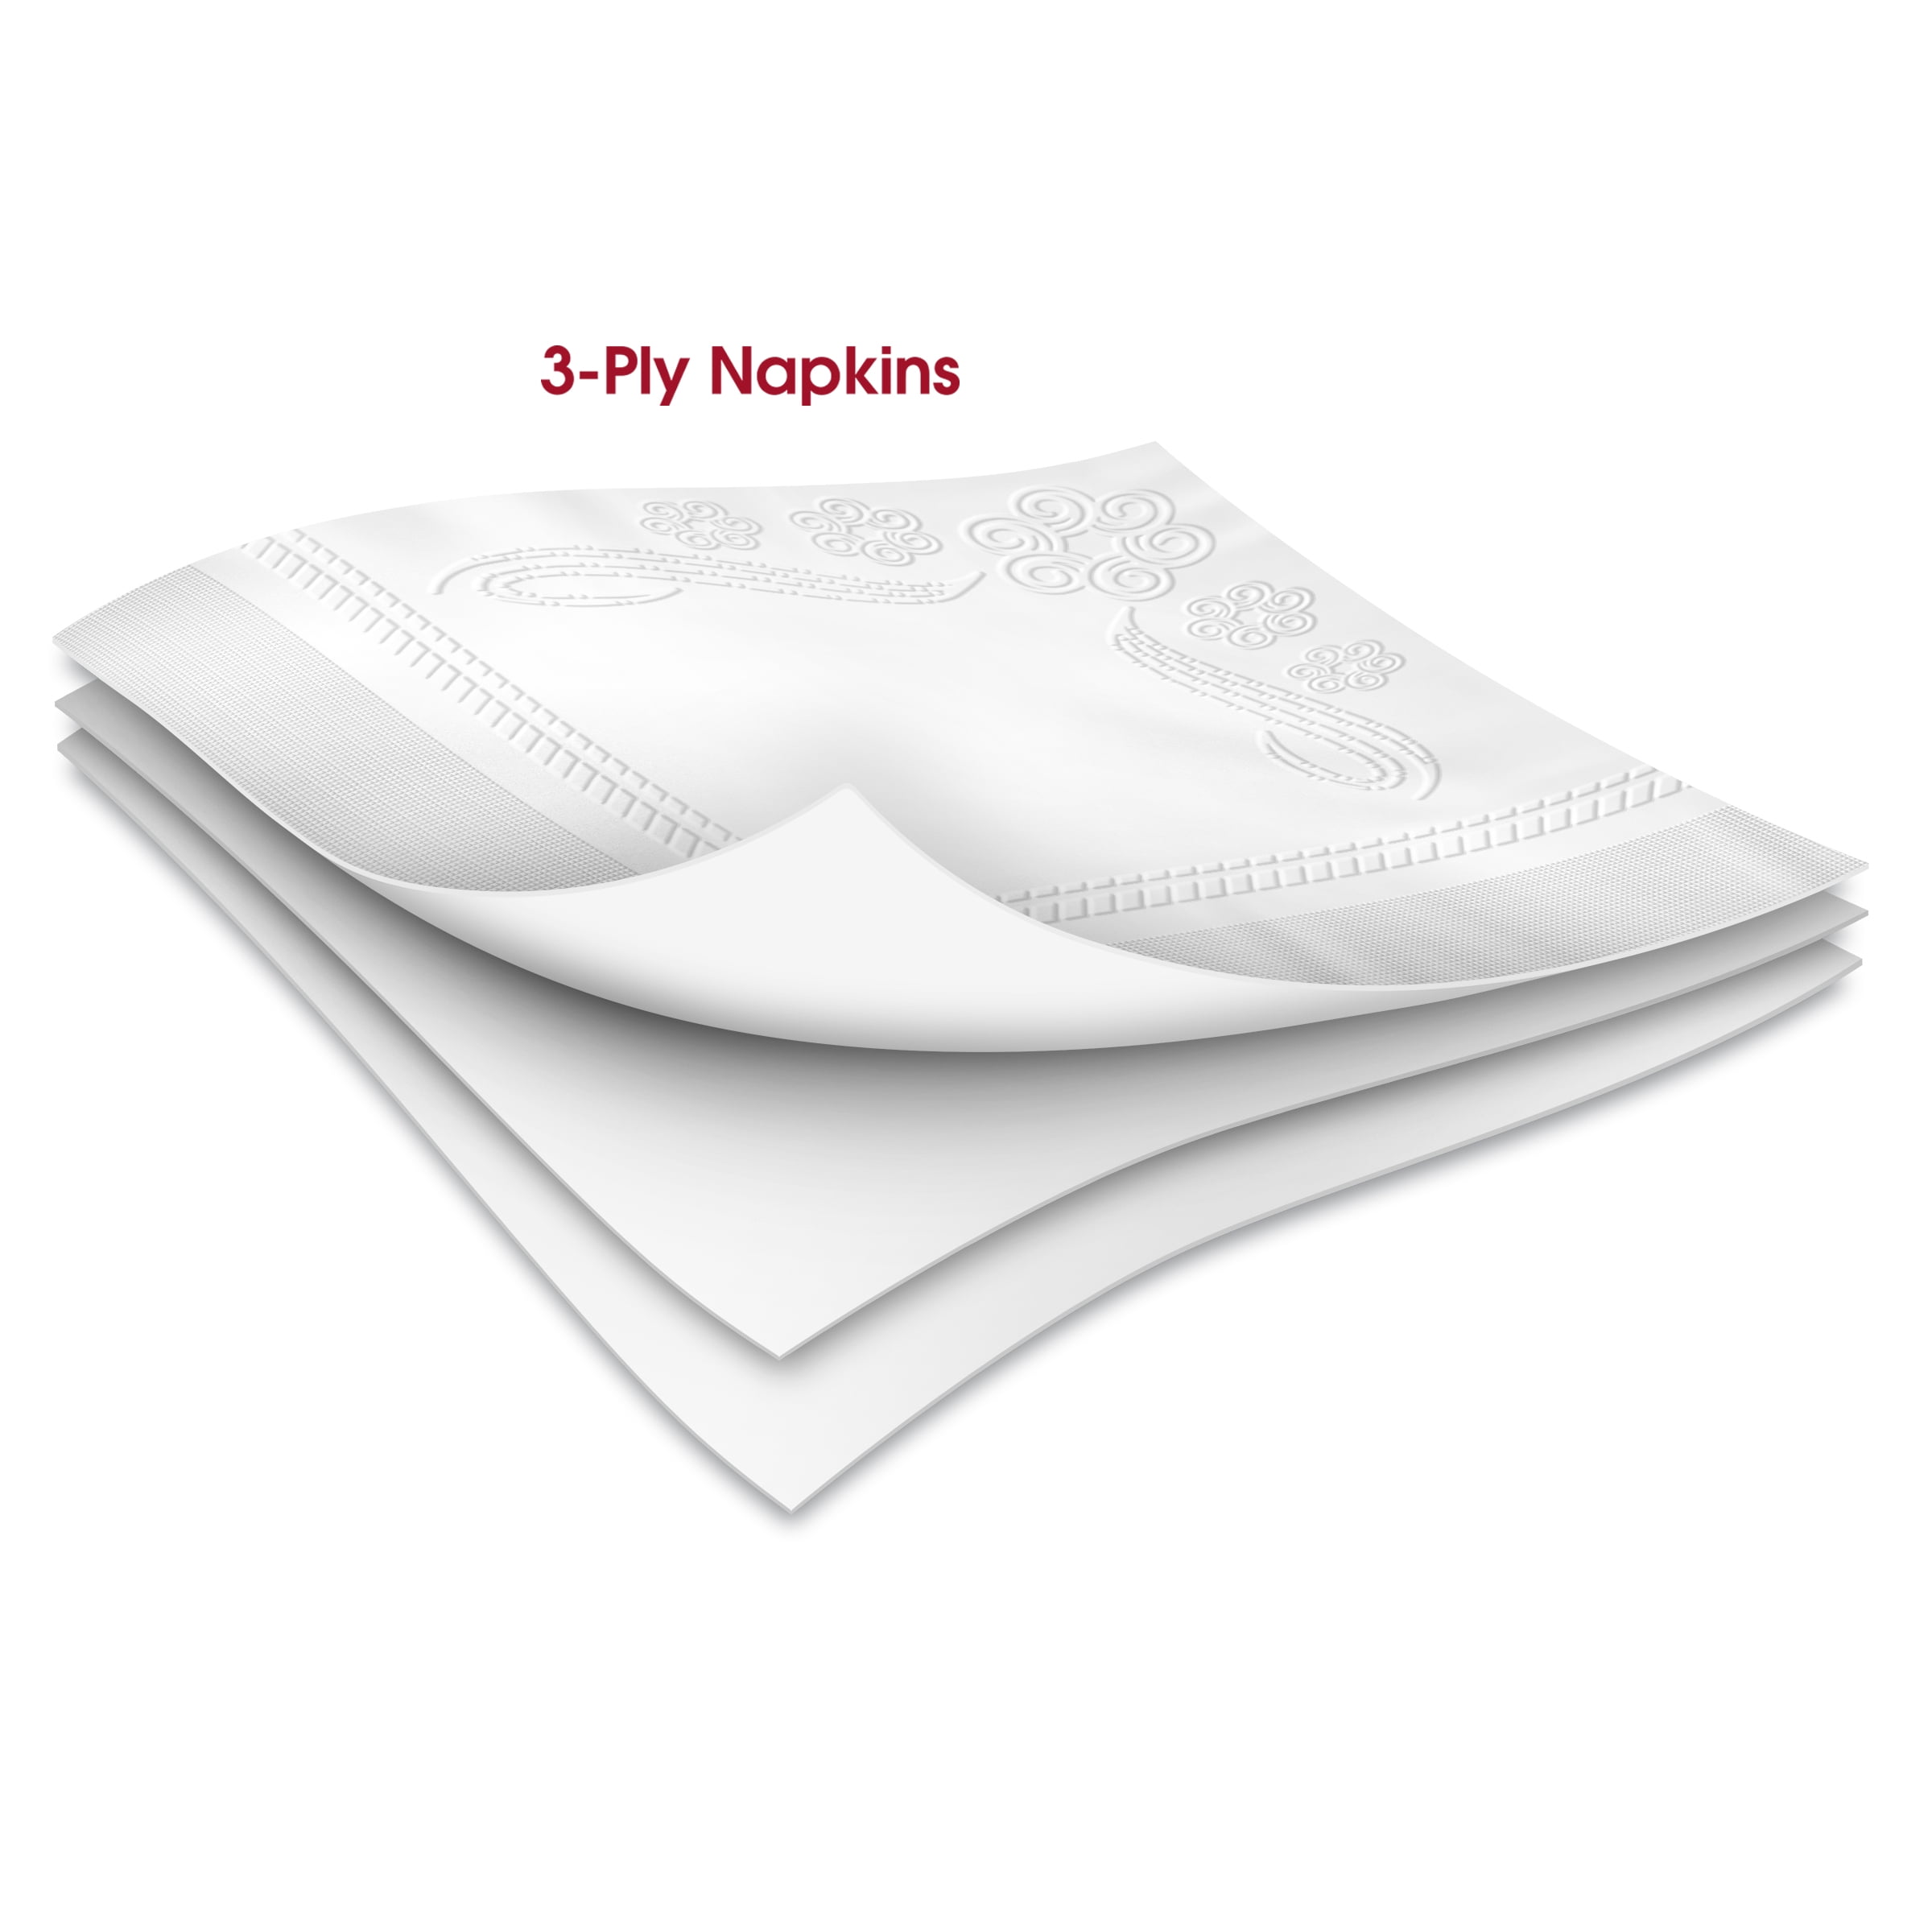 Our wrinkle free napkins are becoming a best seller. Why? They are as  functional and wrinkle free as they are beautiful 💁🏻